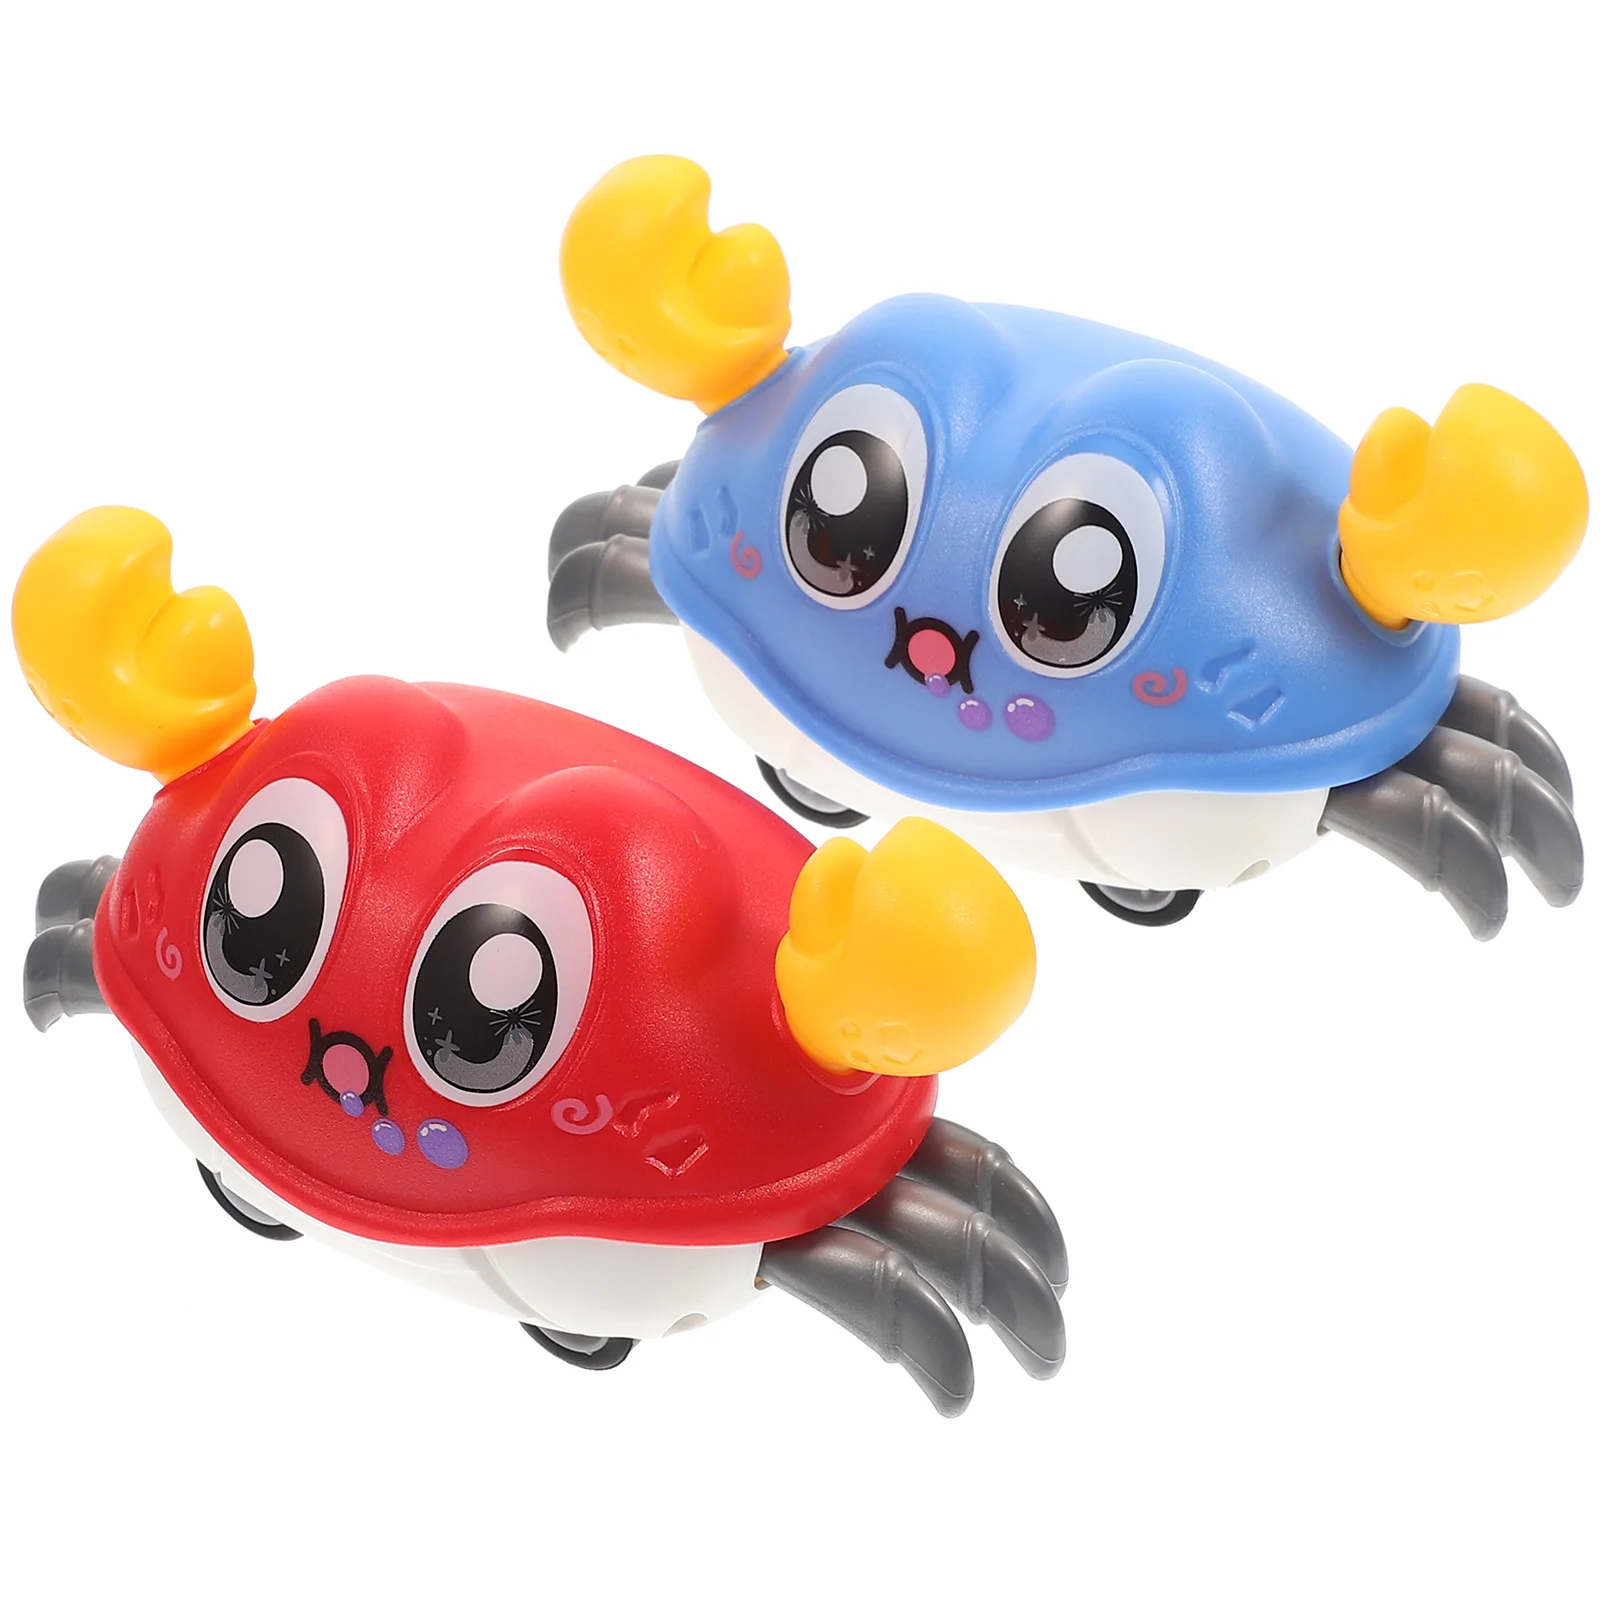 

Toy Crab Car Animals Toys Novelty Dancing Powered Friction Pet Kids Sensory Bath Baby Learning Educational Interactive Glide